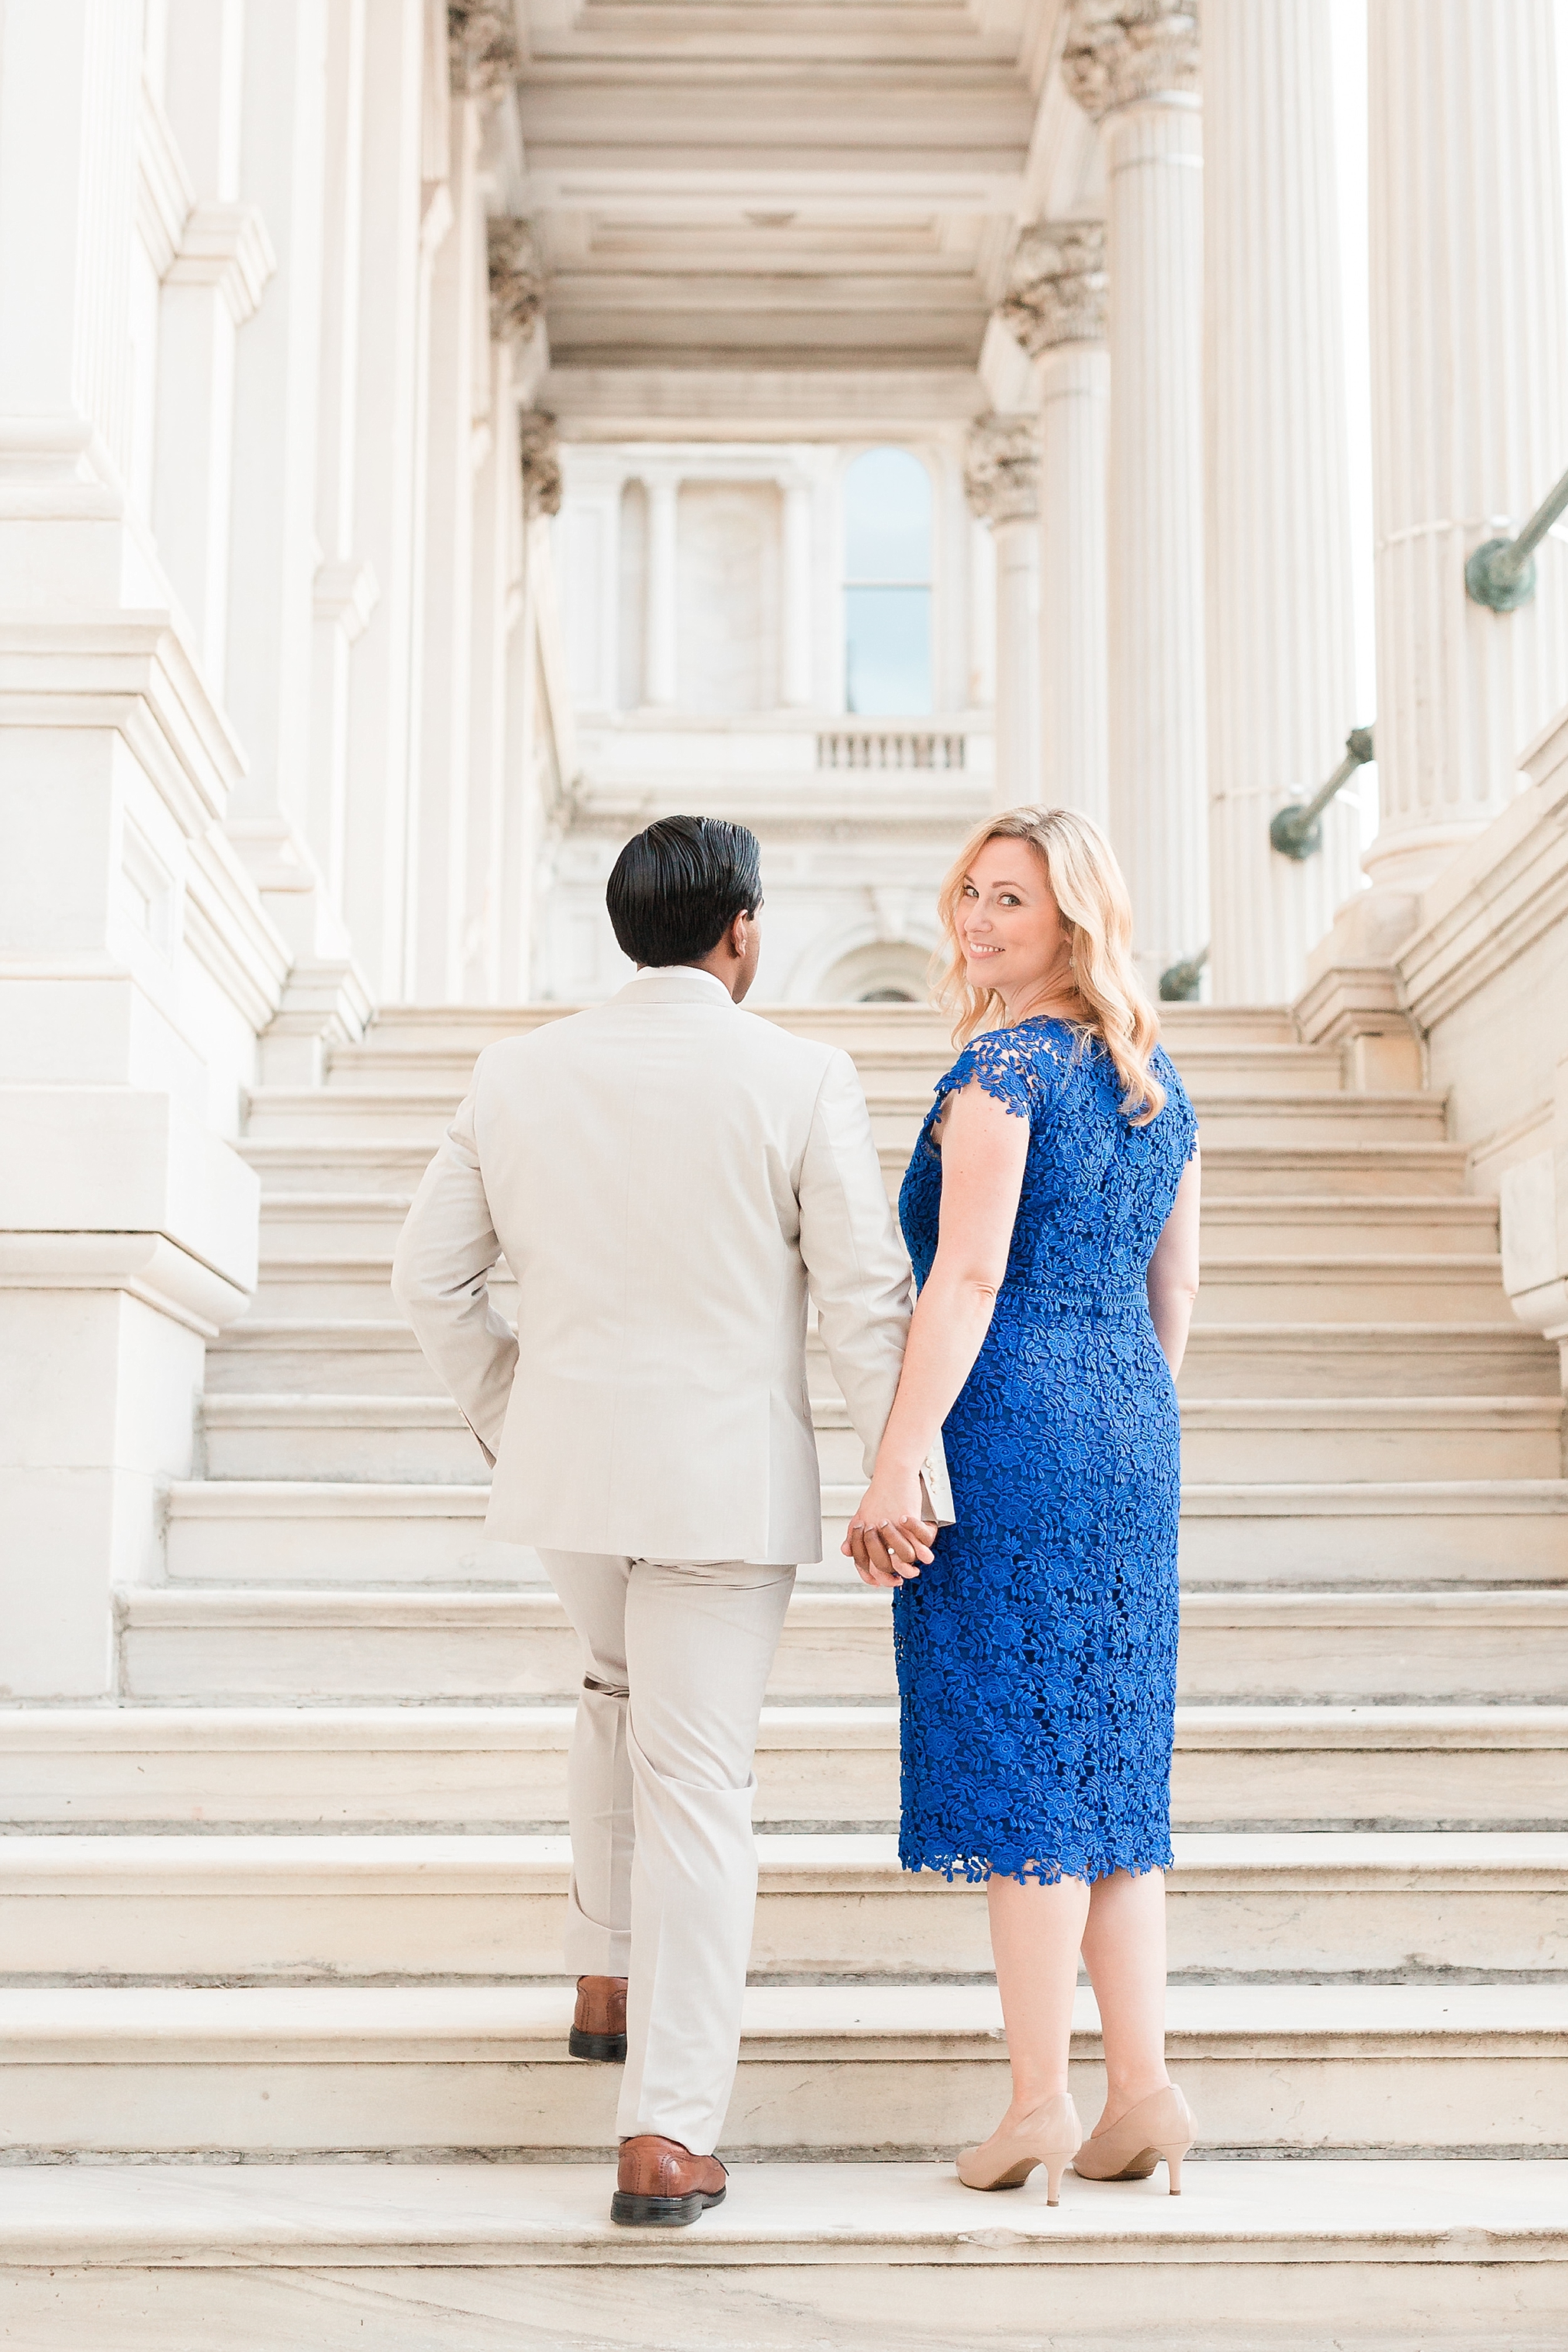 A classic and stylish sunrise engagement session in downtown Baltimore, MD.